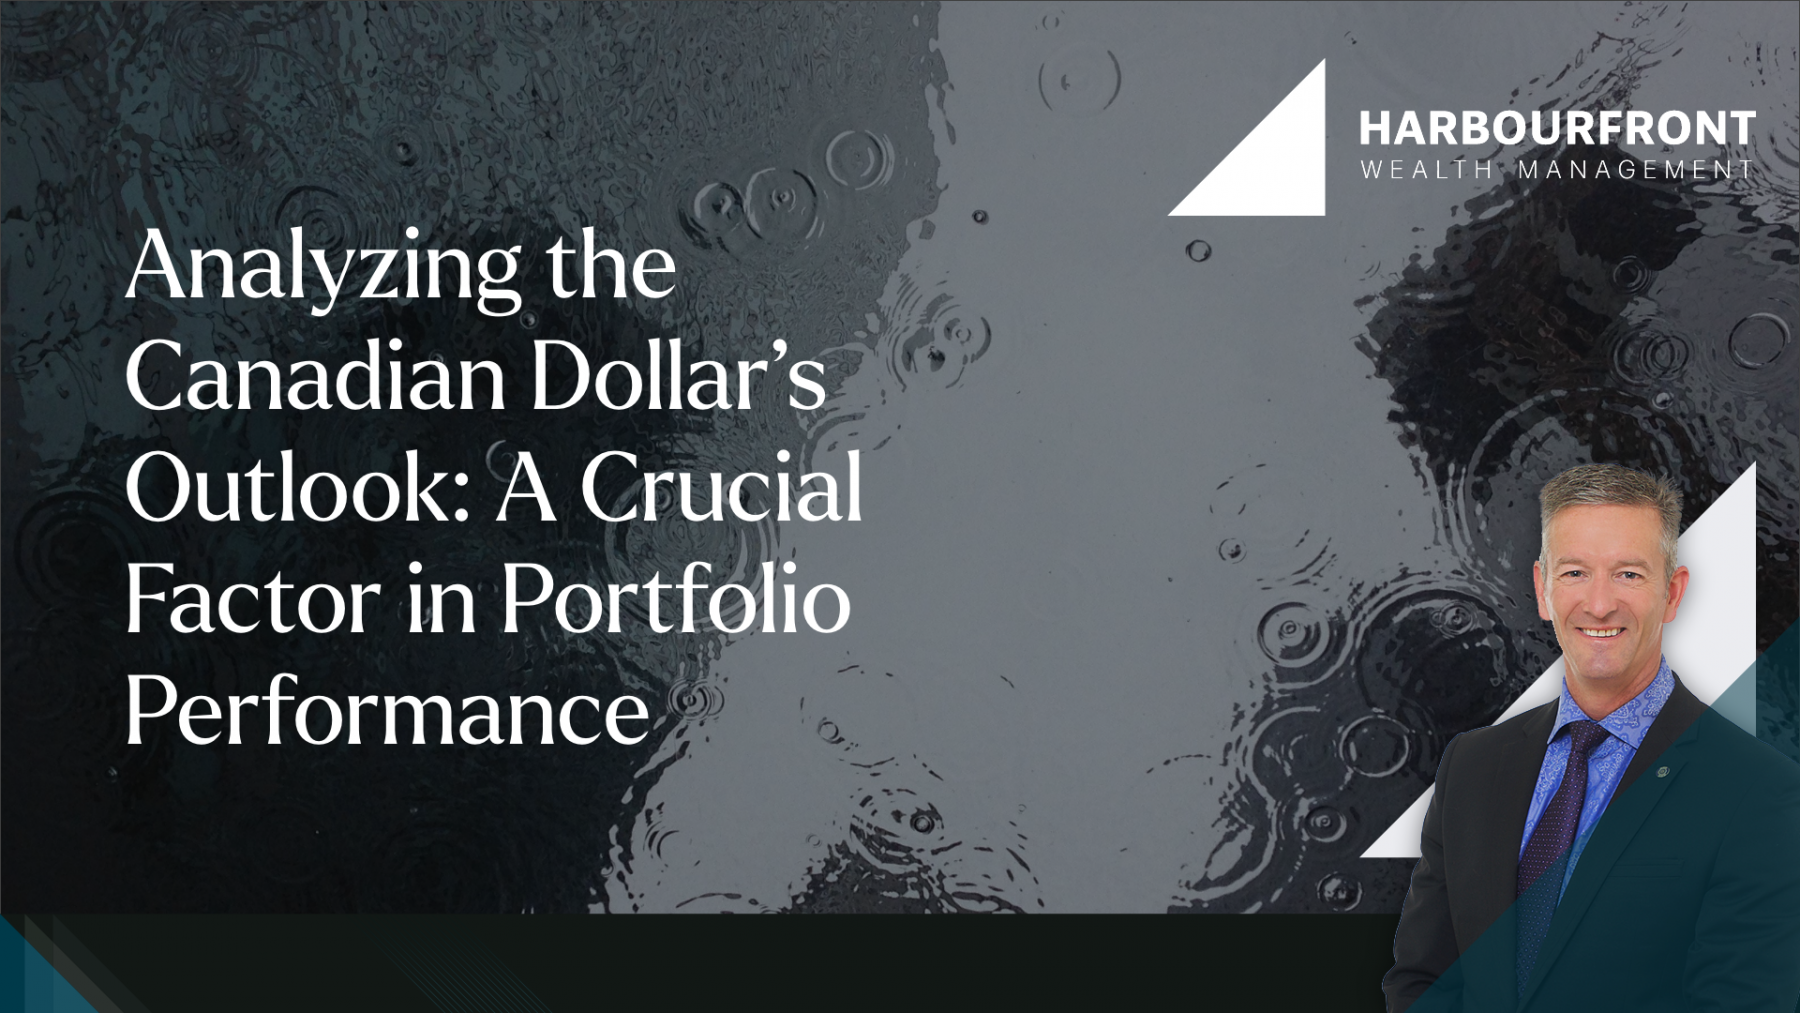 Analyzing the Canadian Dollar’s Outlook: A Crucial Factor in Portfolio Performance